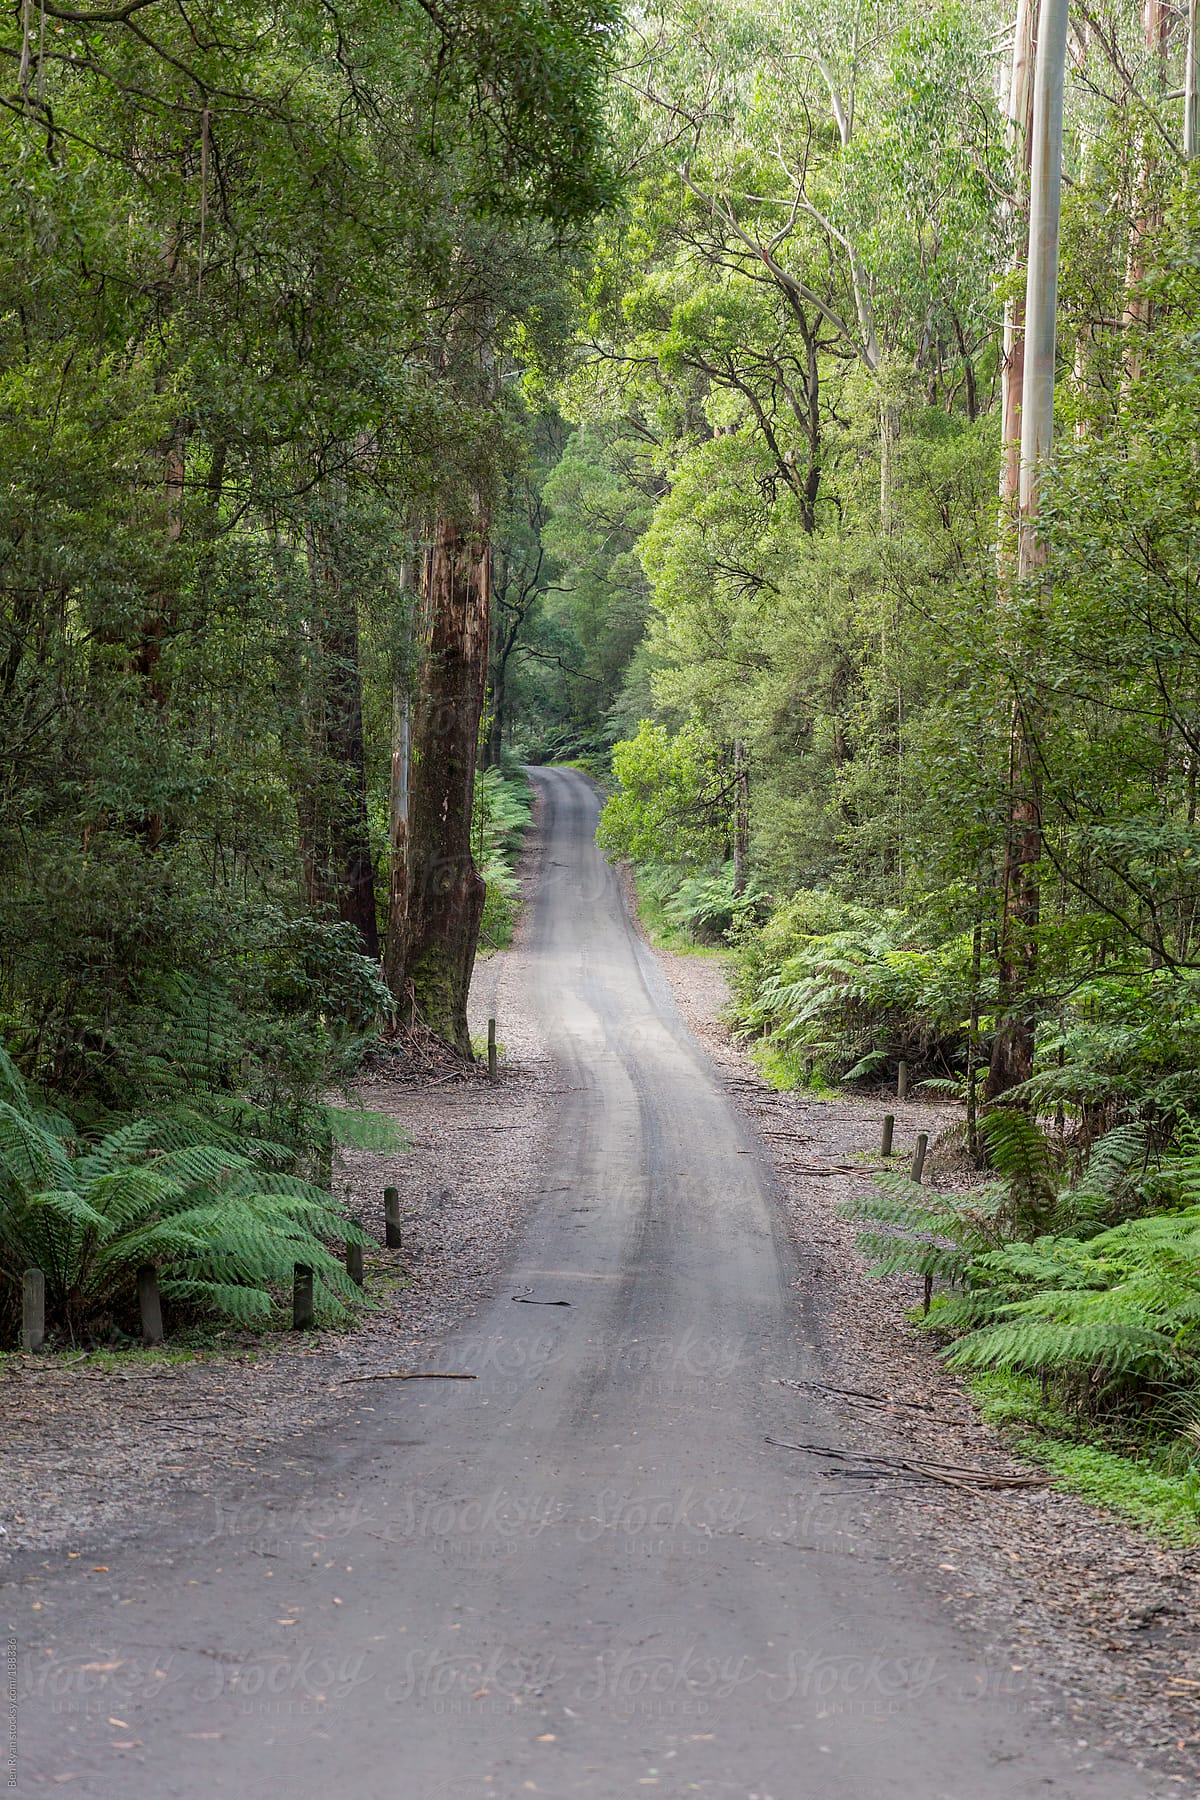 Gravel road and carpark in the middle of the Australian Bush